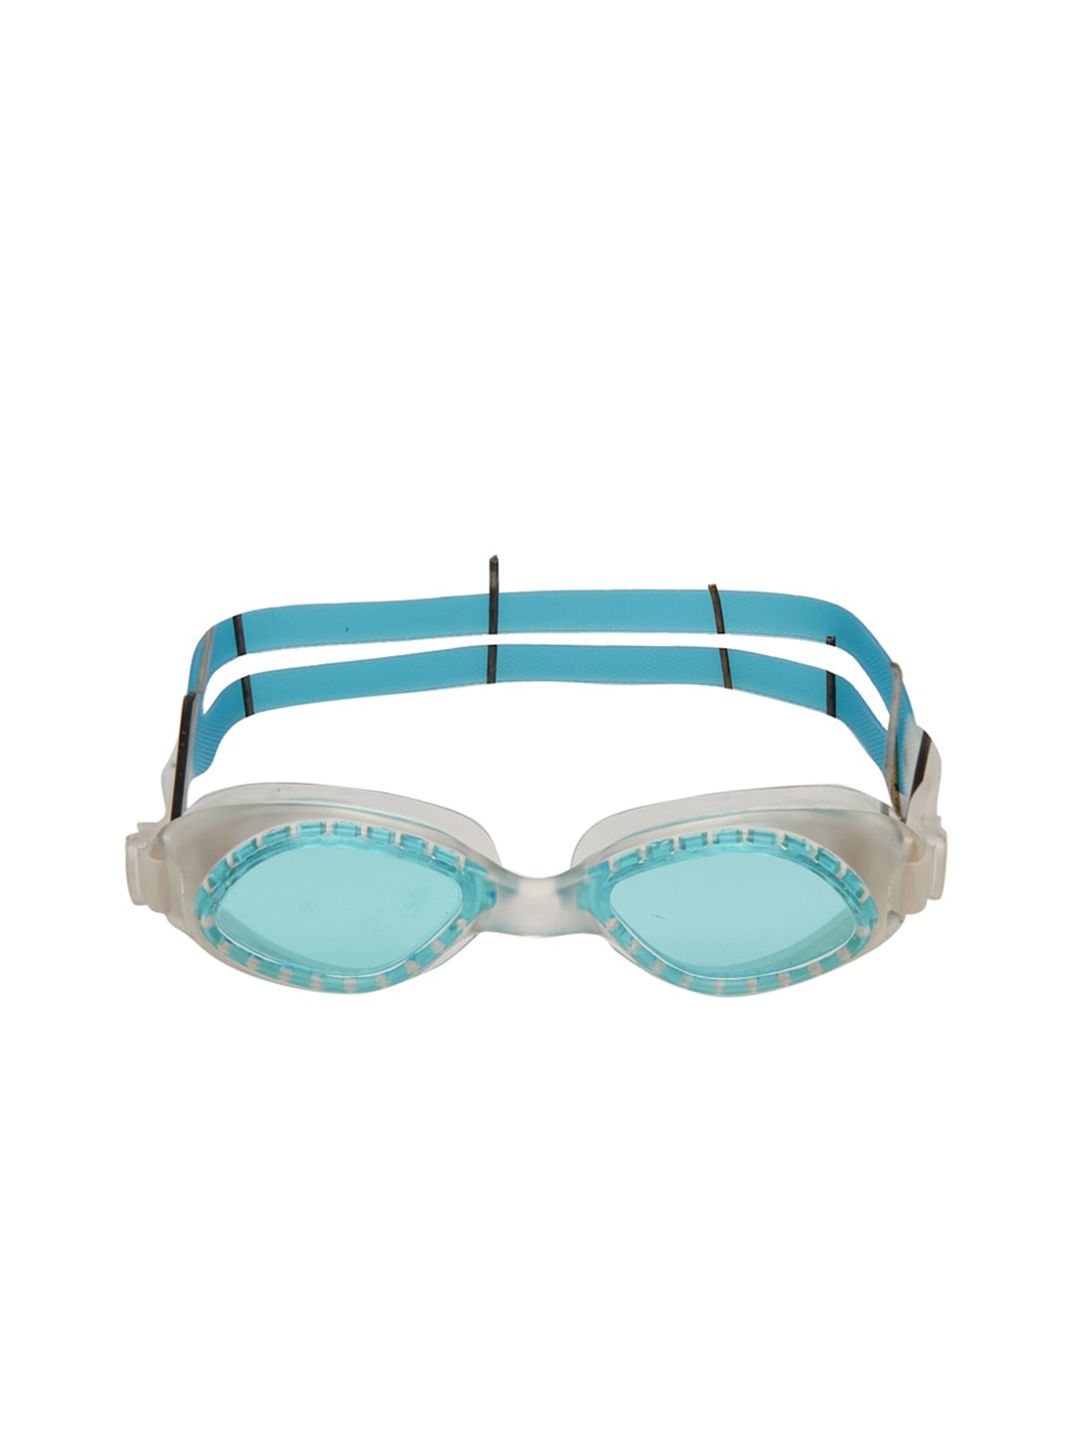 CUKOO Women Blue Solid Comfort-Fit Swimming Goggles Price in India